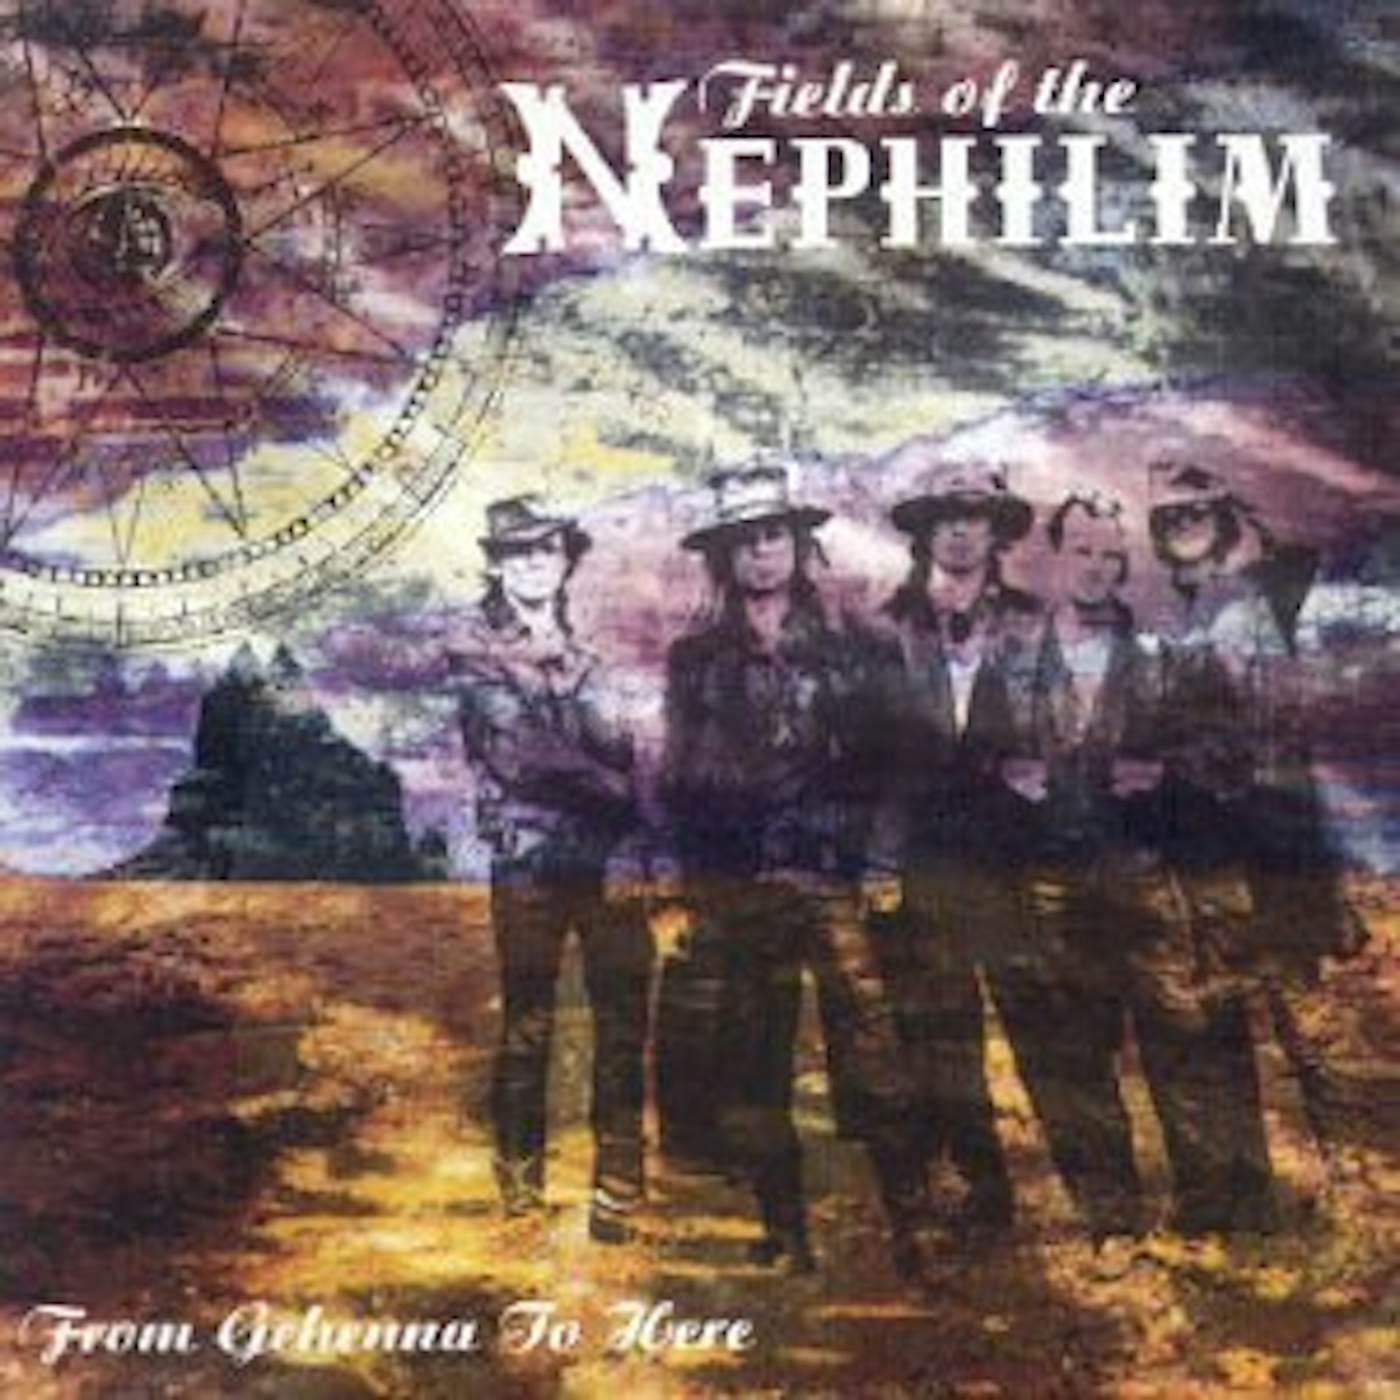 Fields Of The Nephilim FROM GEHENNA TO HERE CD